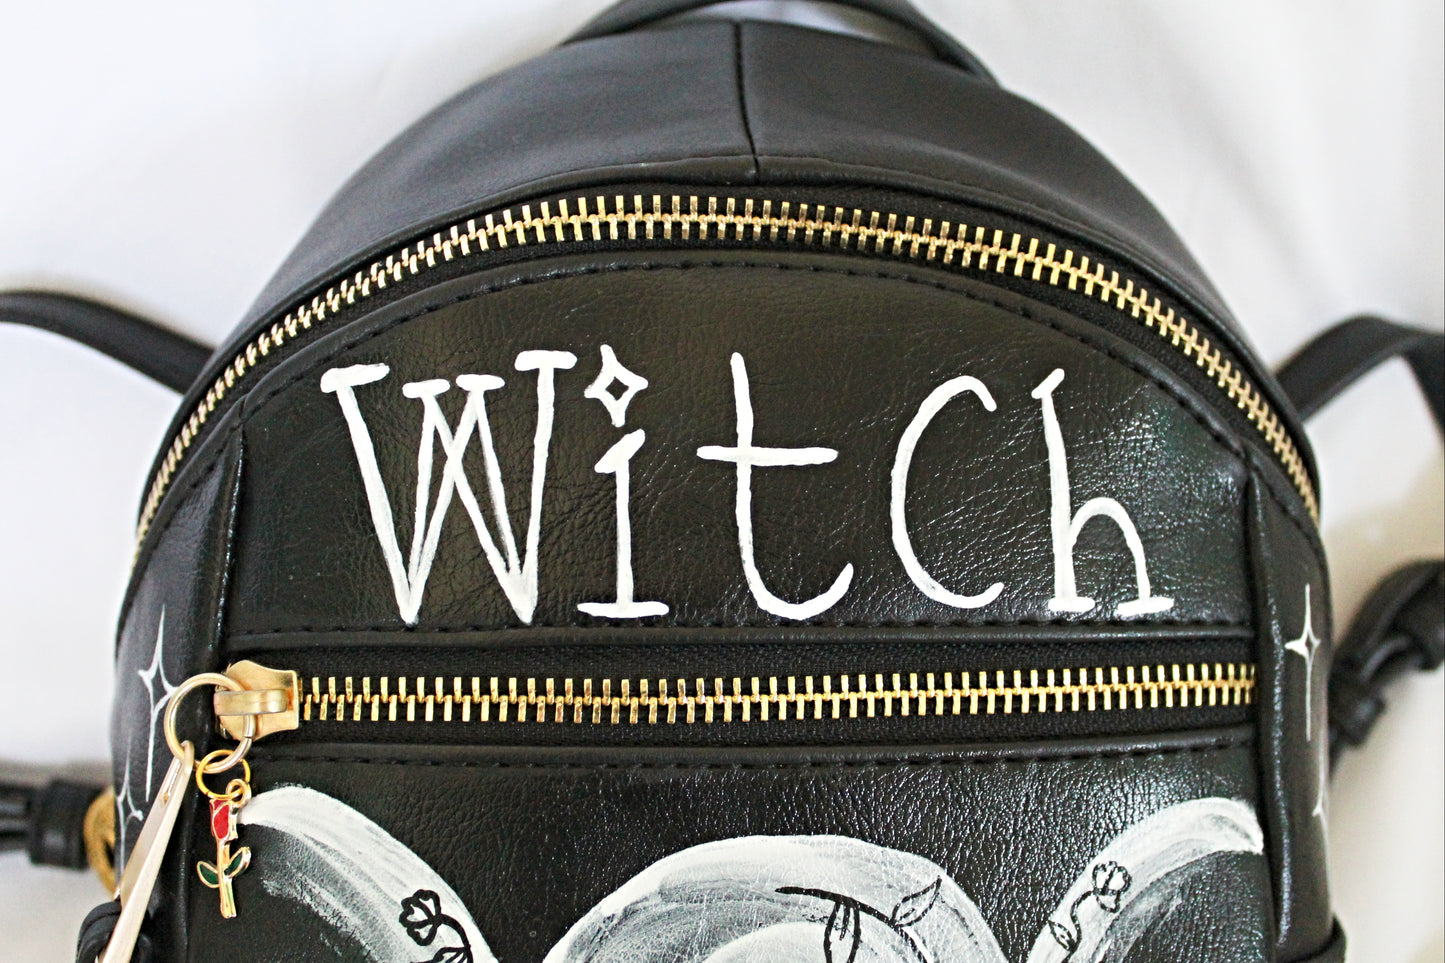 Triple Moon Witch Mini Backpack